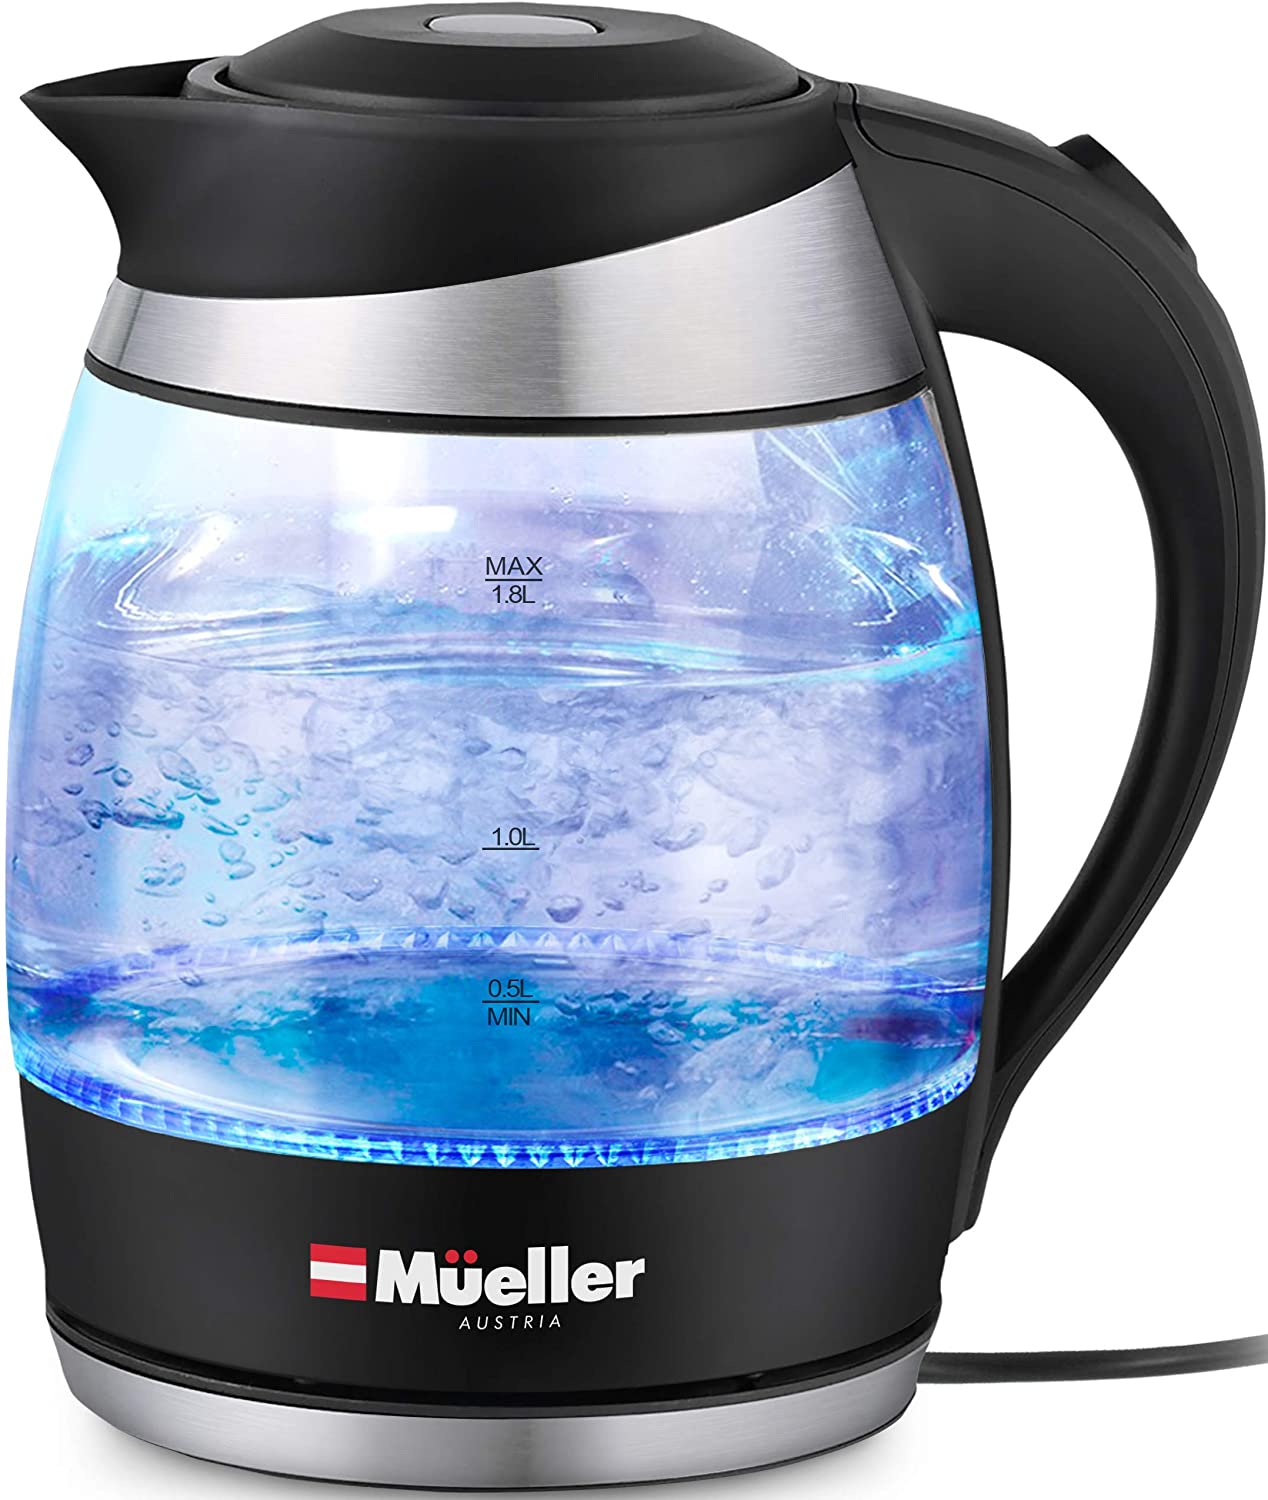 glass electric Mueller brand electric kettle